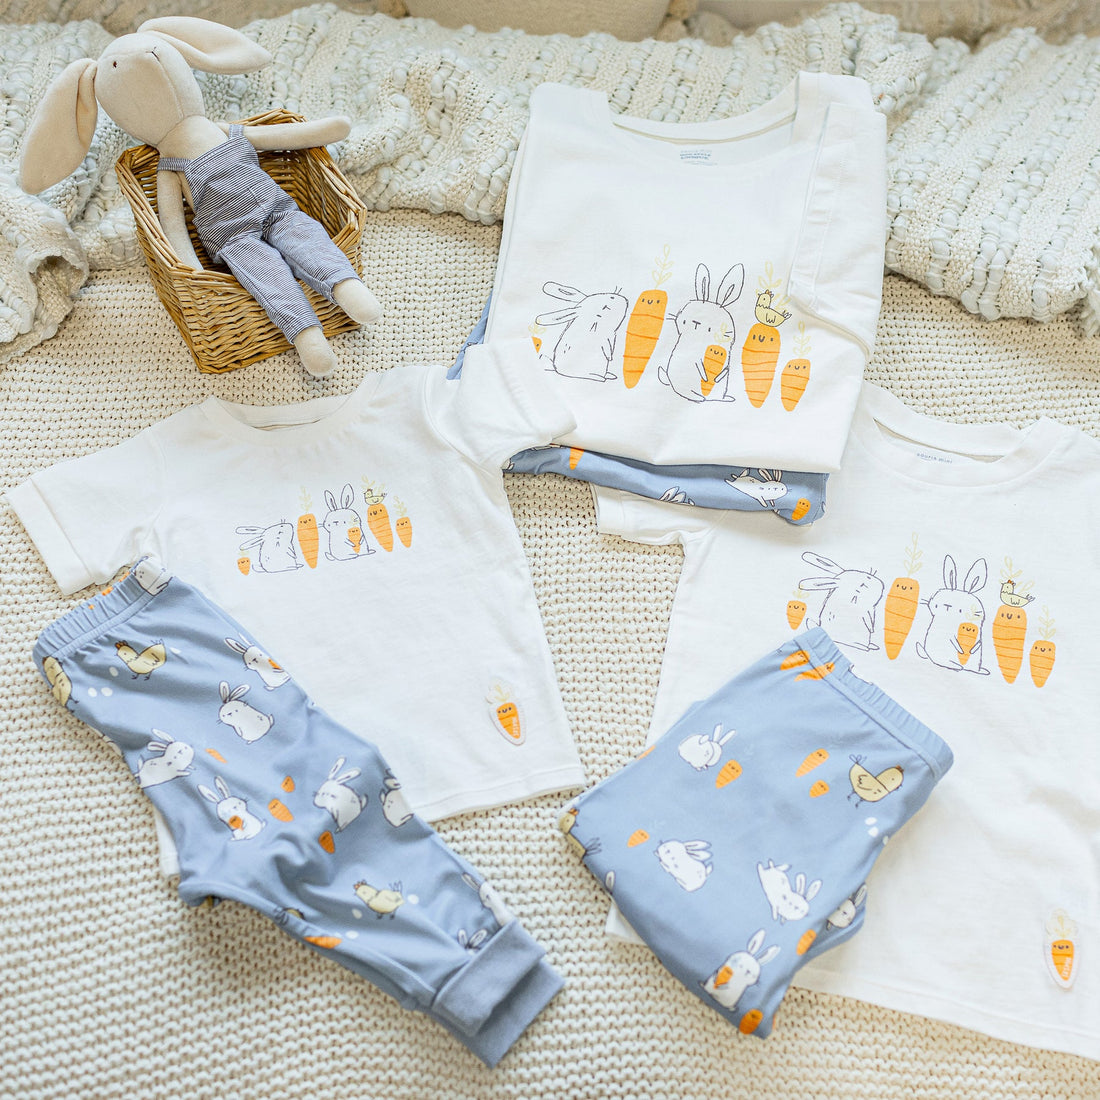 CREAM AND BLUE TWO-PIECES PAJAMA WITH BUNNIES AND CHICKENS PRINT, BABY